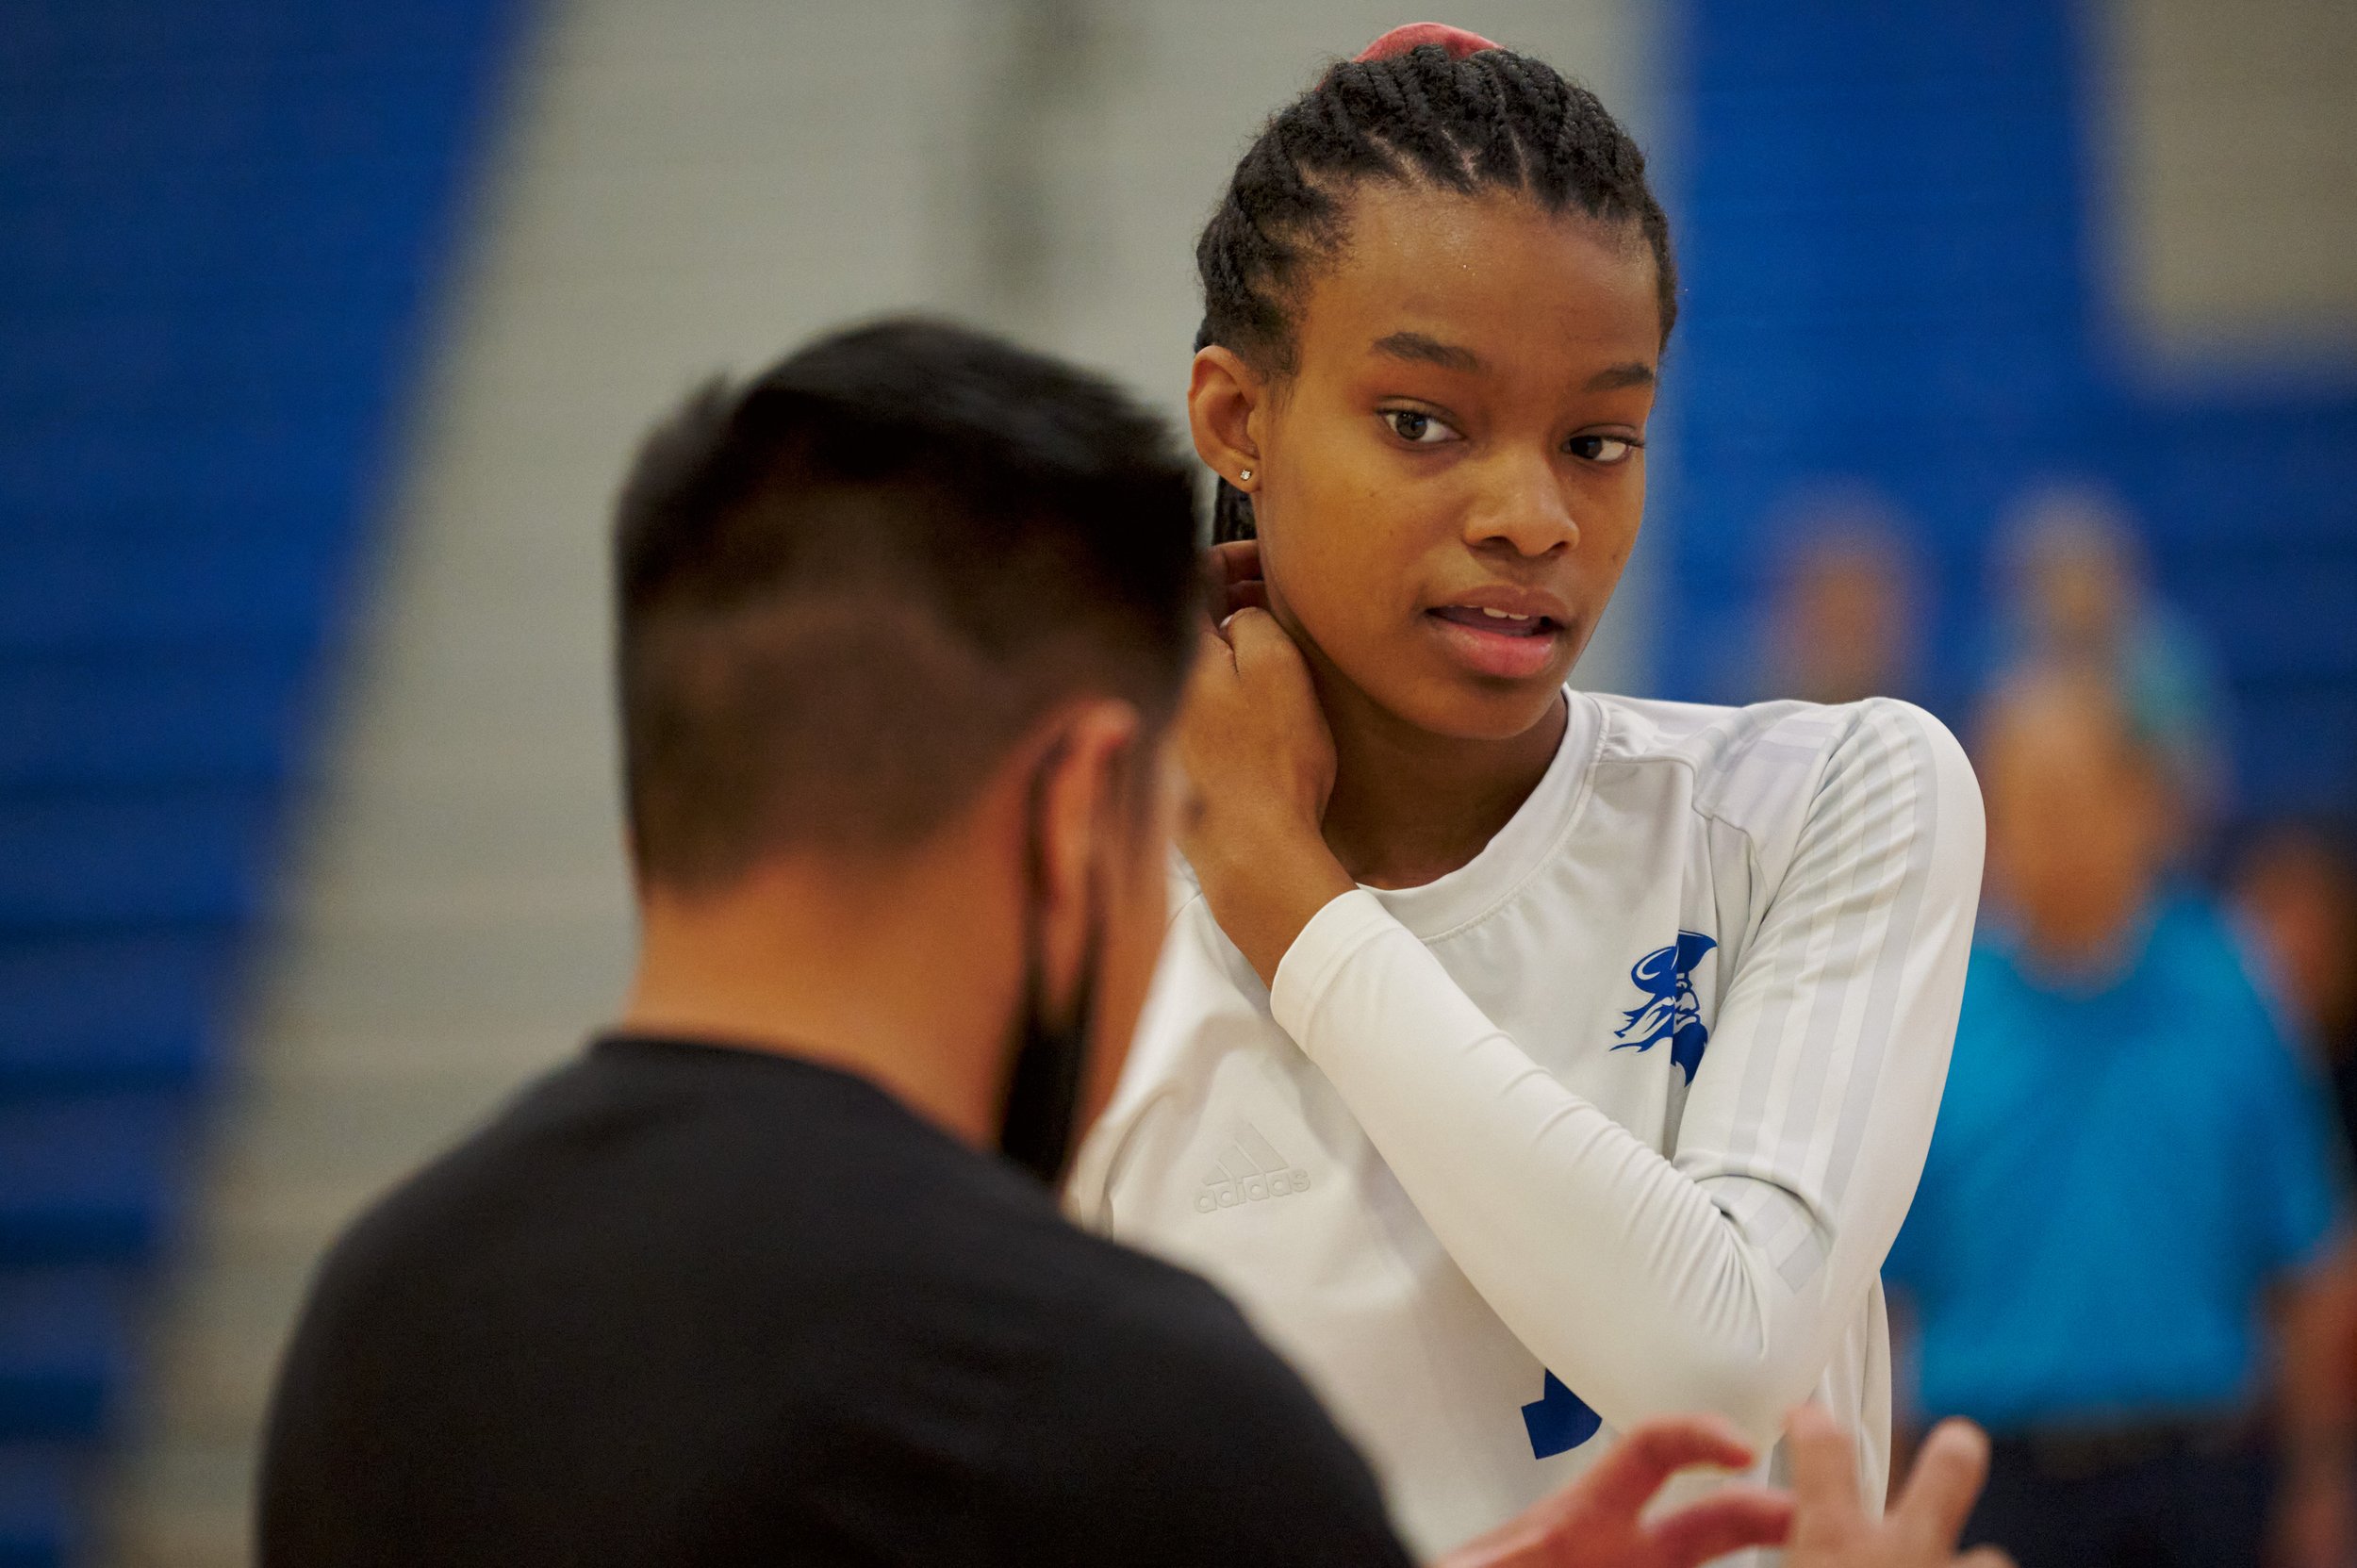  Santa Monica College Corsairs' Zarha Stanton listens to Head Coach Christian Cammayo during the women's volleyball match against the College of the Desert Roadrunners on Friday, October 7, 2022, at the Corsair Gym in Santa Monica, Calif. The Corsair